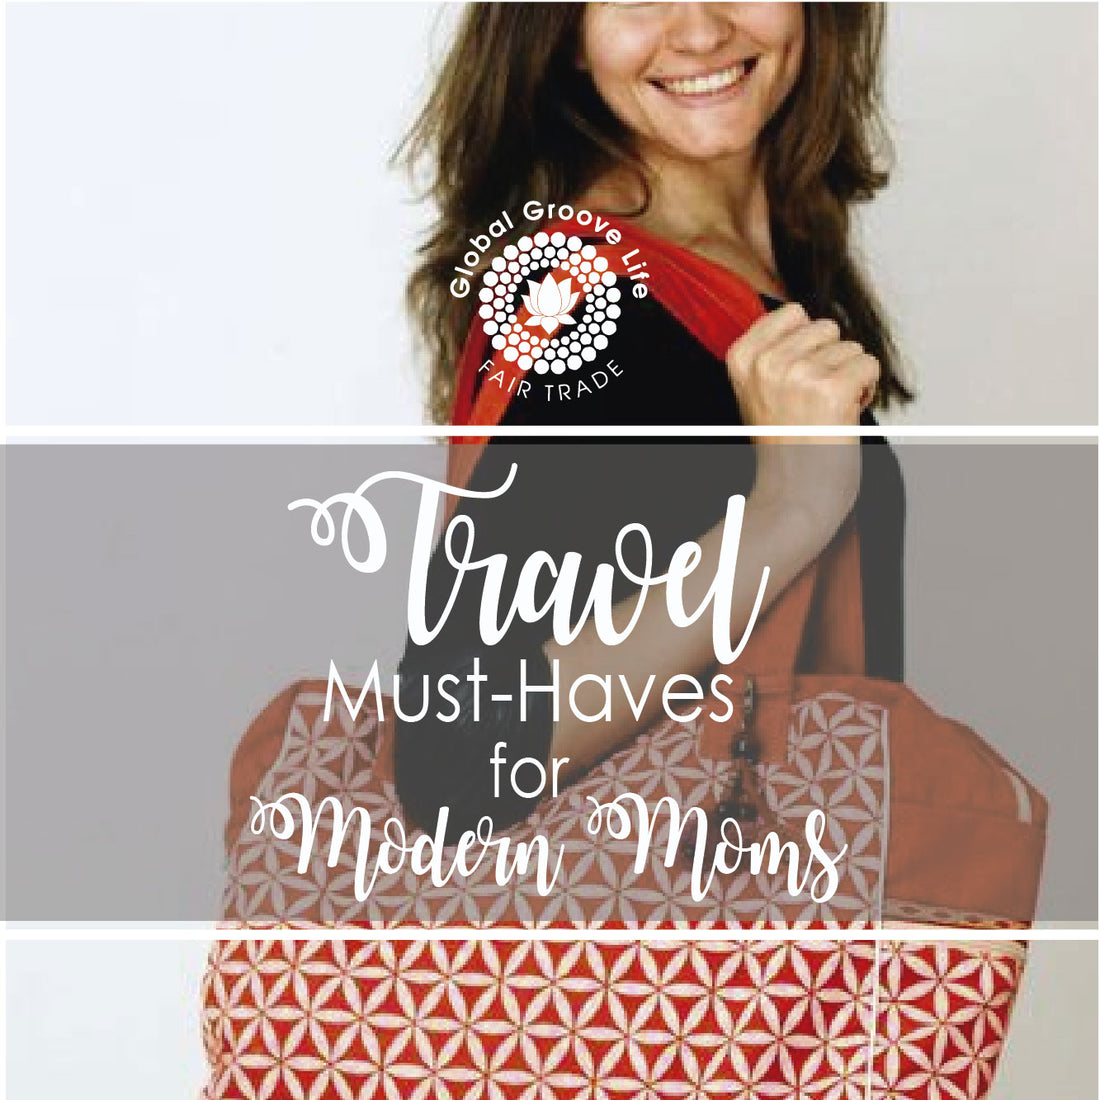 4 Travel Must-Haves For Modern Moms